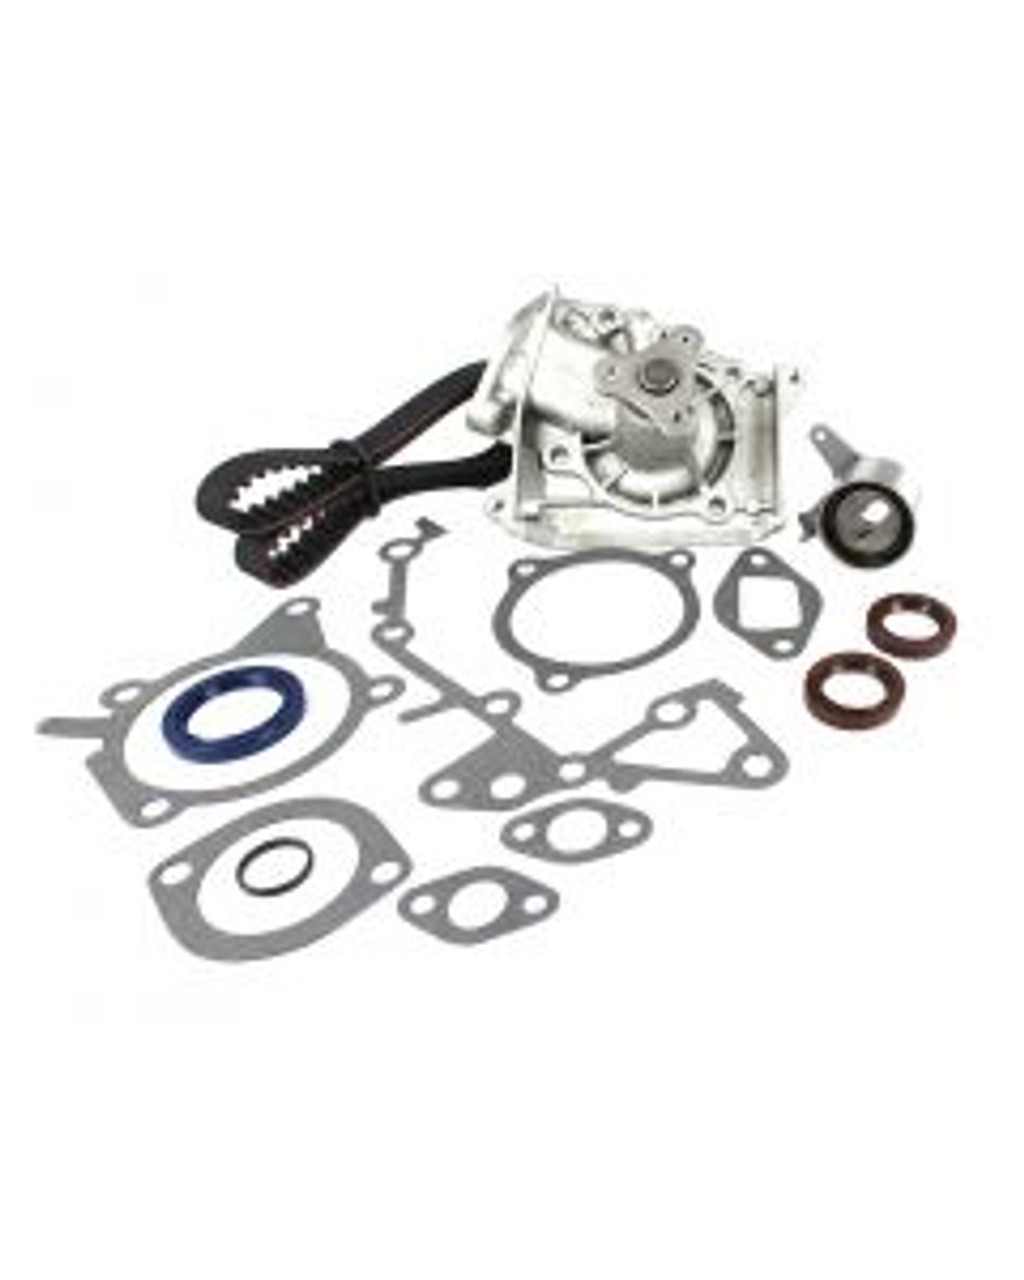 Timing Belt Kit with Water Pump 1.8L 1991 Mazda Protege - TBK451WP.17